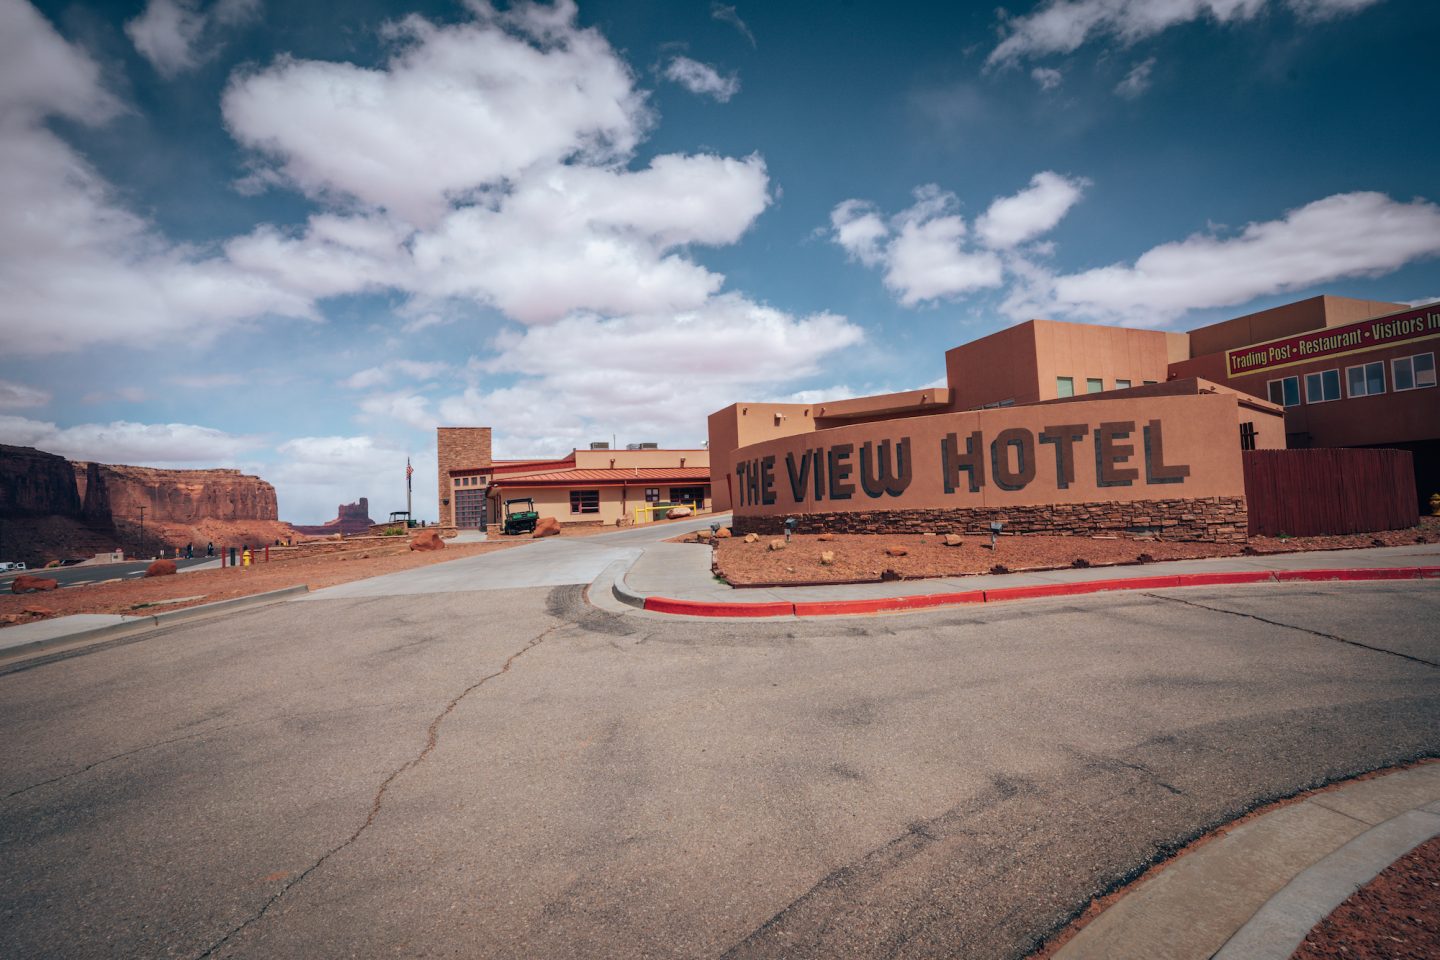 The View Hotel - Monument Valley Tribal Park, Arizona